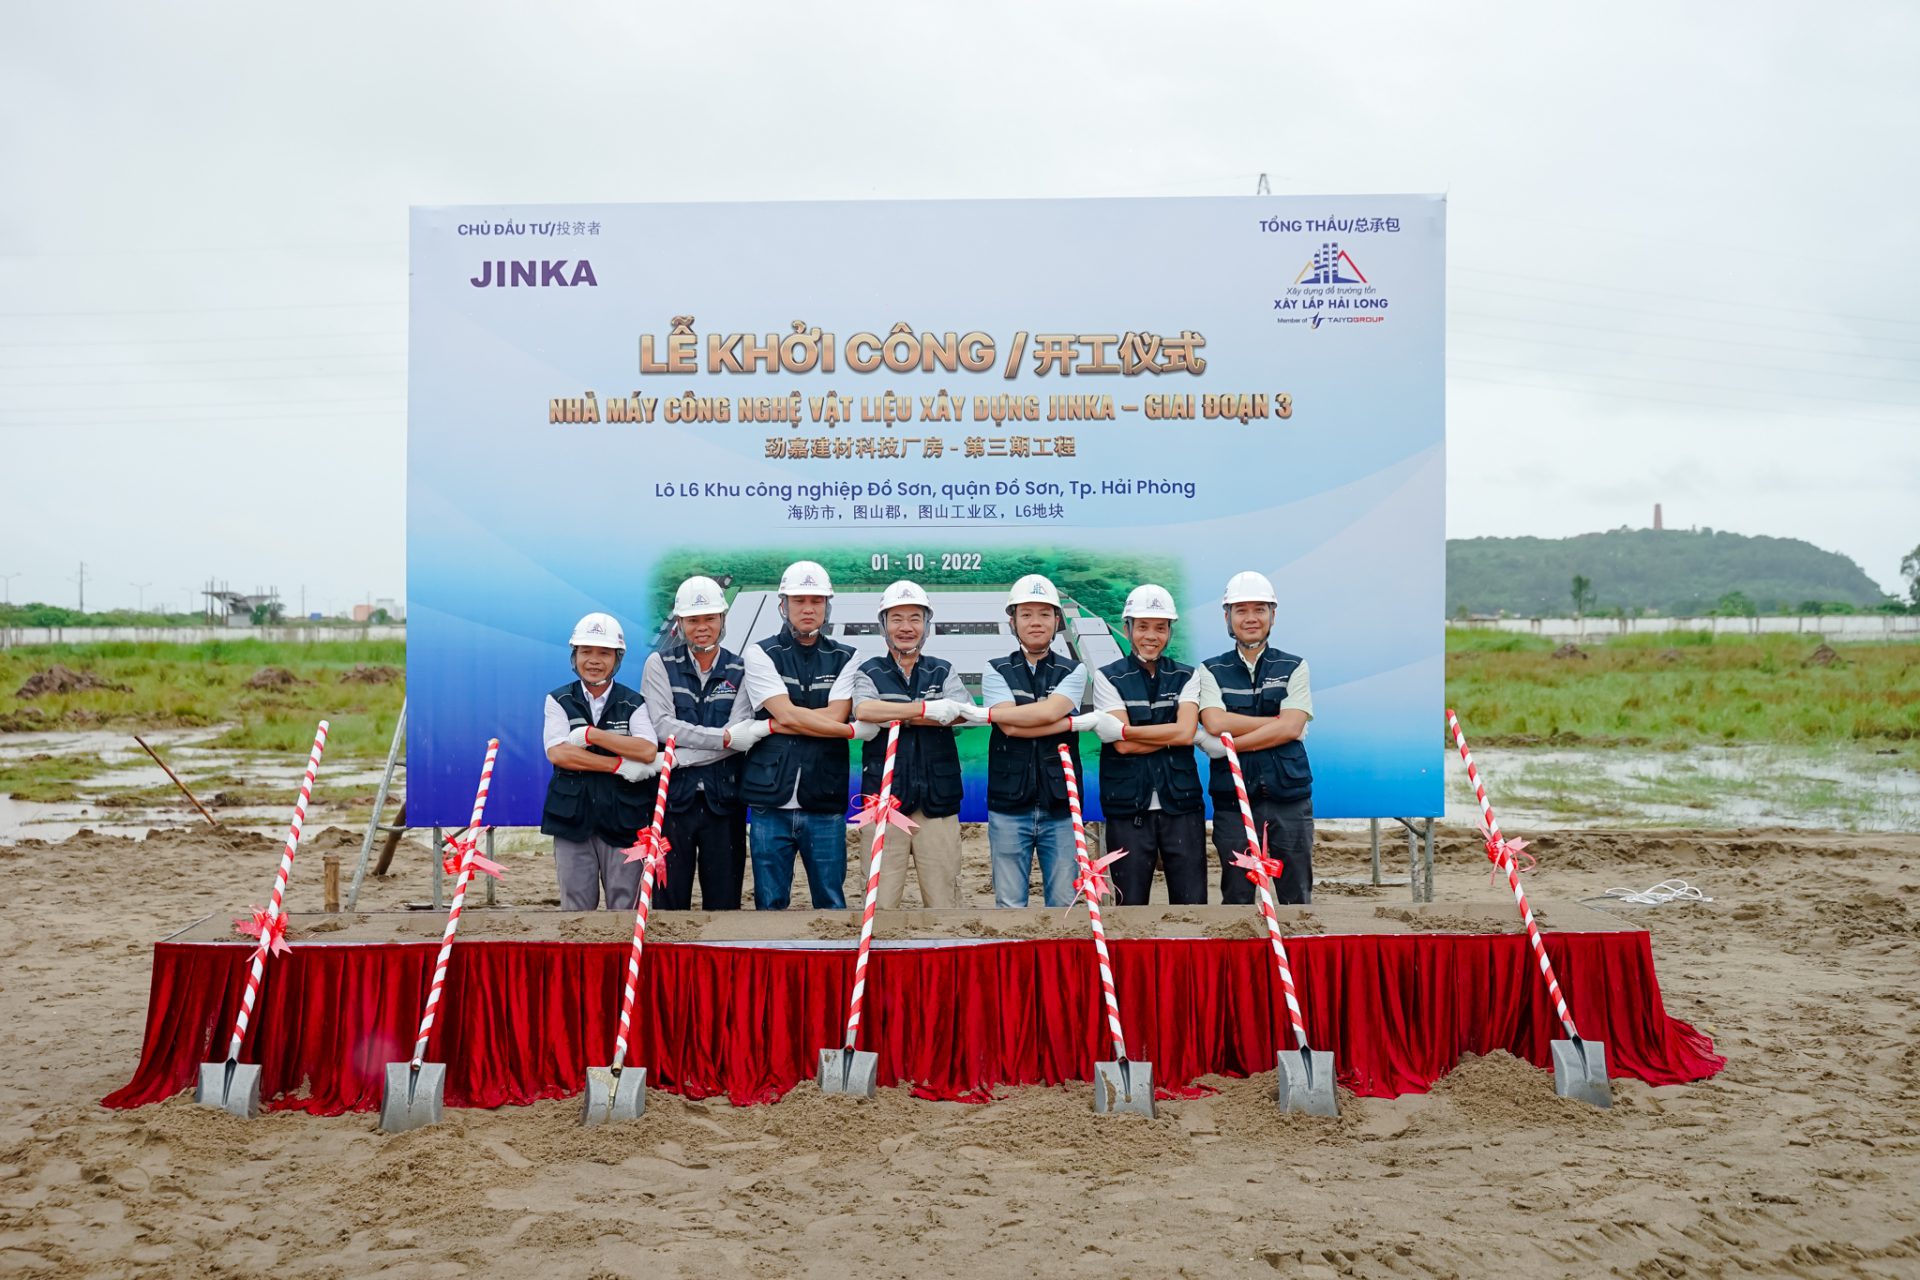 STARTING THE JINKA MATERIALS TECHNOLOGY FACTORY CONSTRUCTION PROJECT – PHASE 3